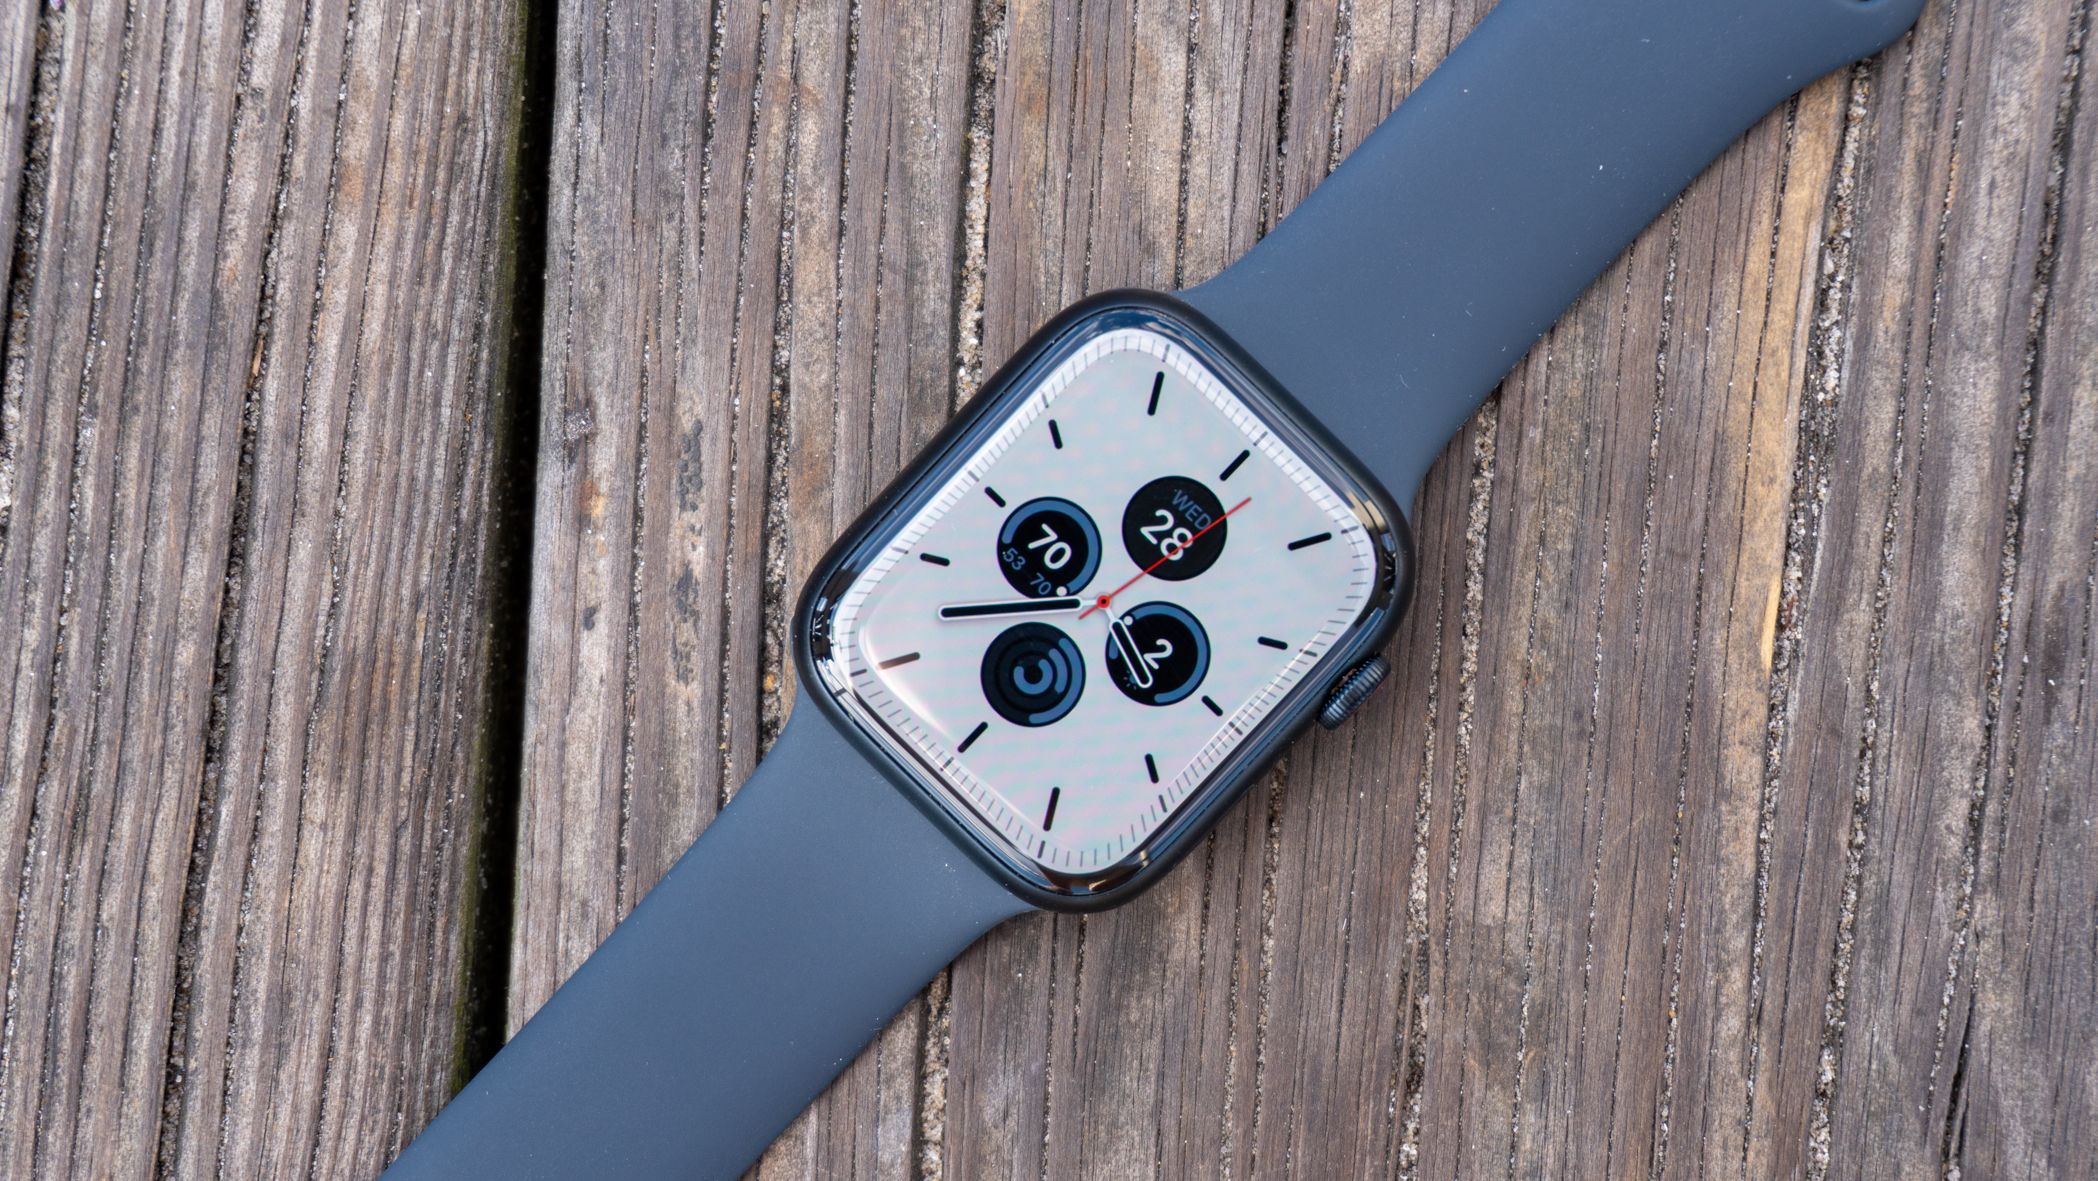 Apple Watch Series 3 Review: The Smartwatch that Could Change Your Mind